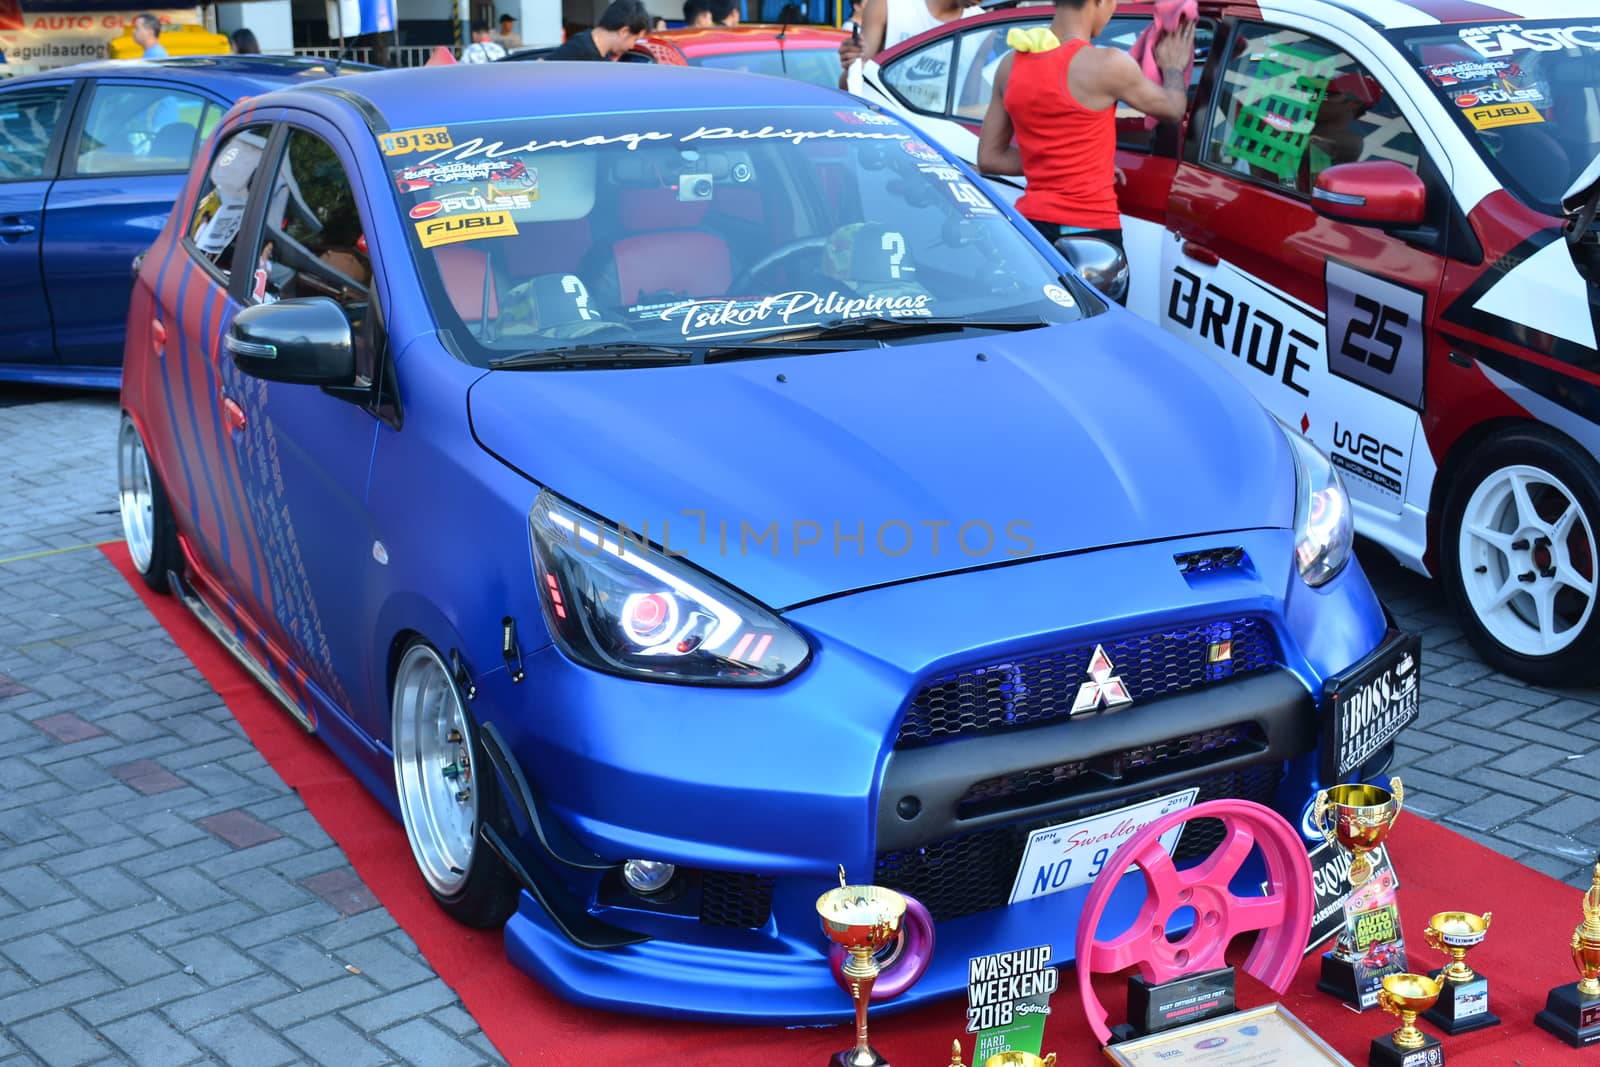 PASAY, PH - DEC 8 - Mitsubishi mirage at Bumper to Bumper car show on December 8, 2018 in Pasay, Philippines.